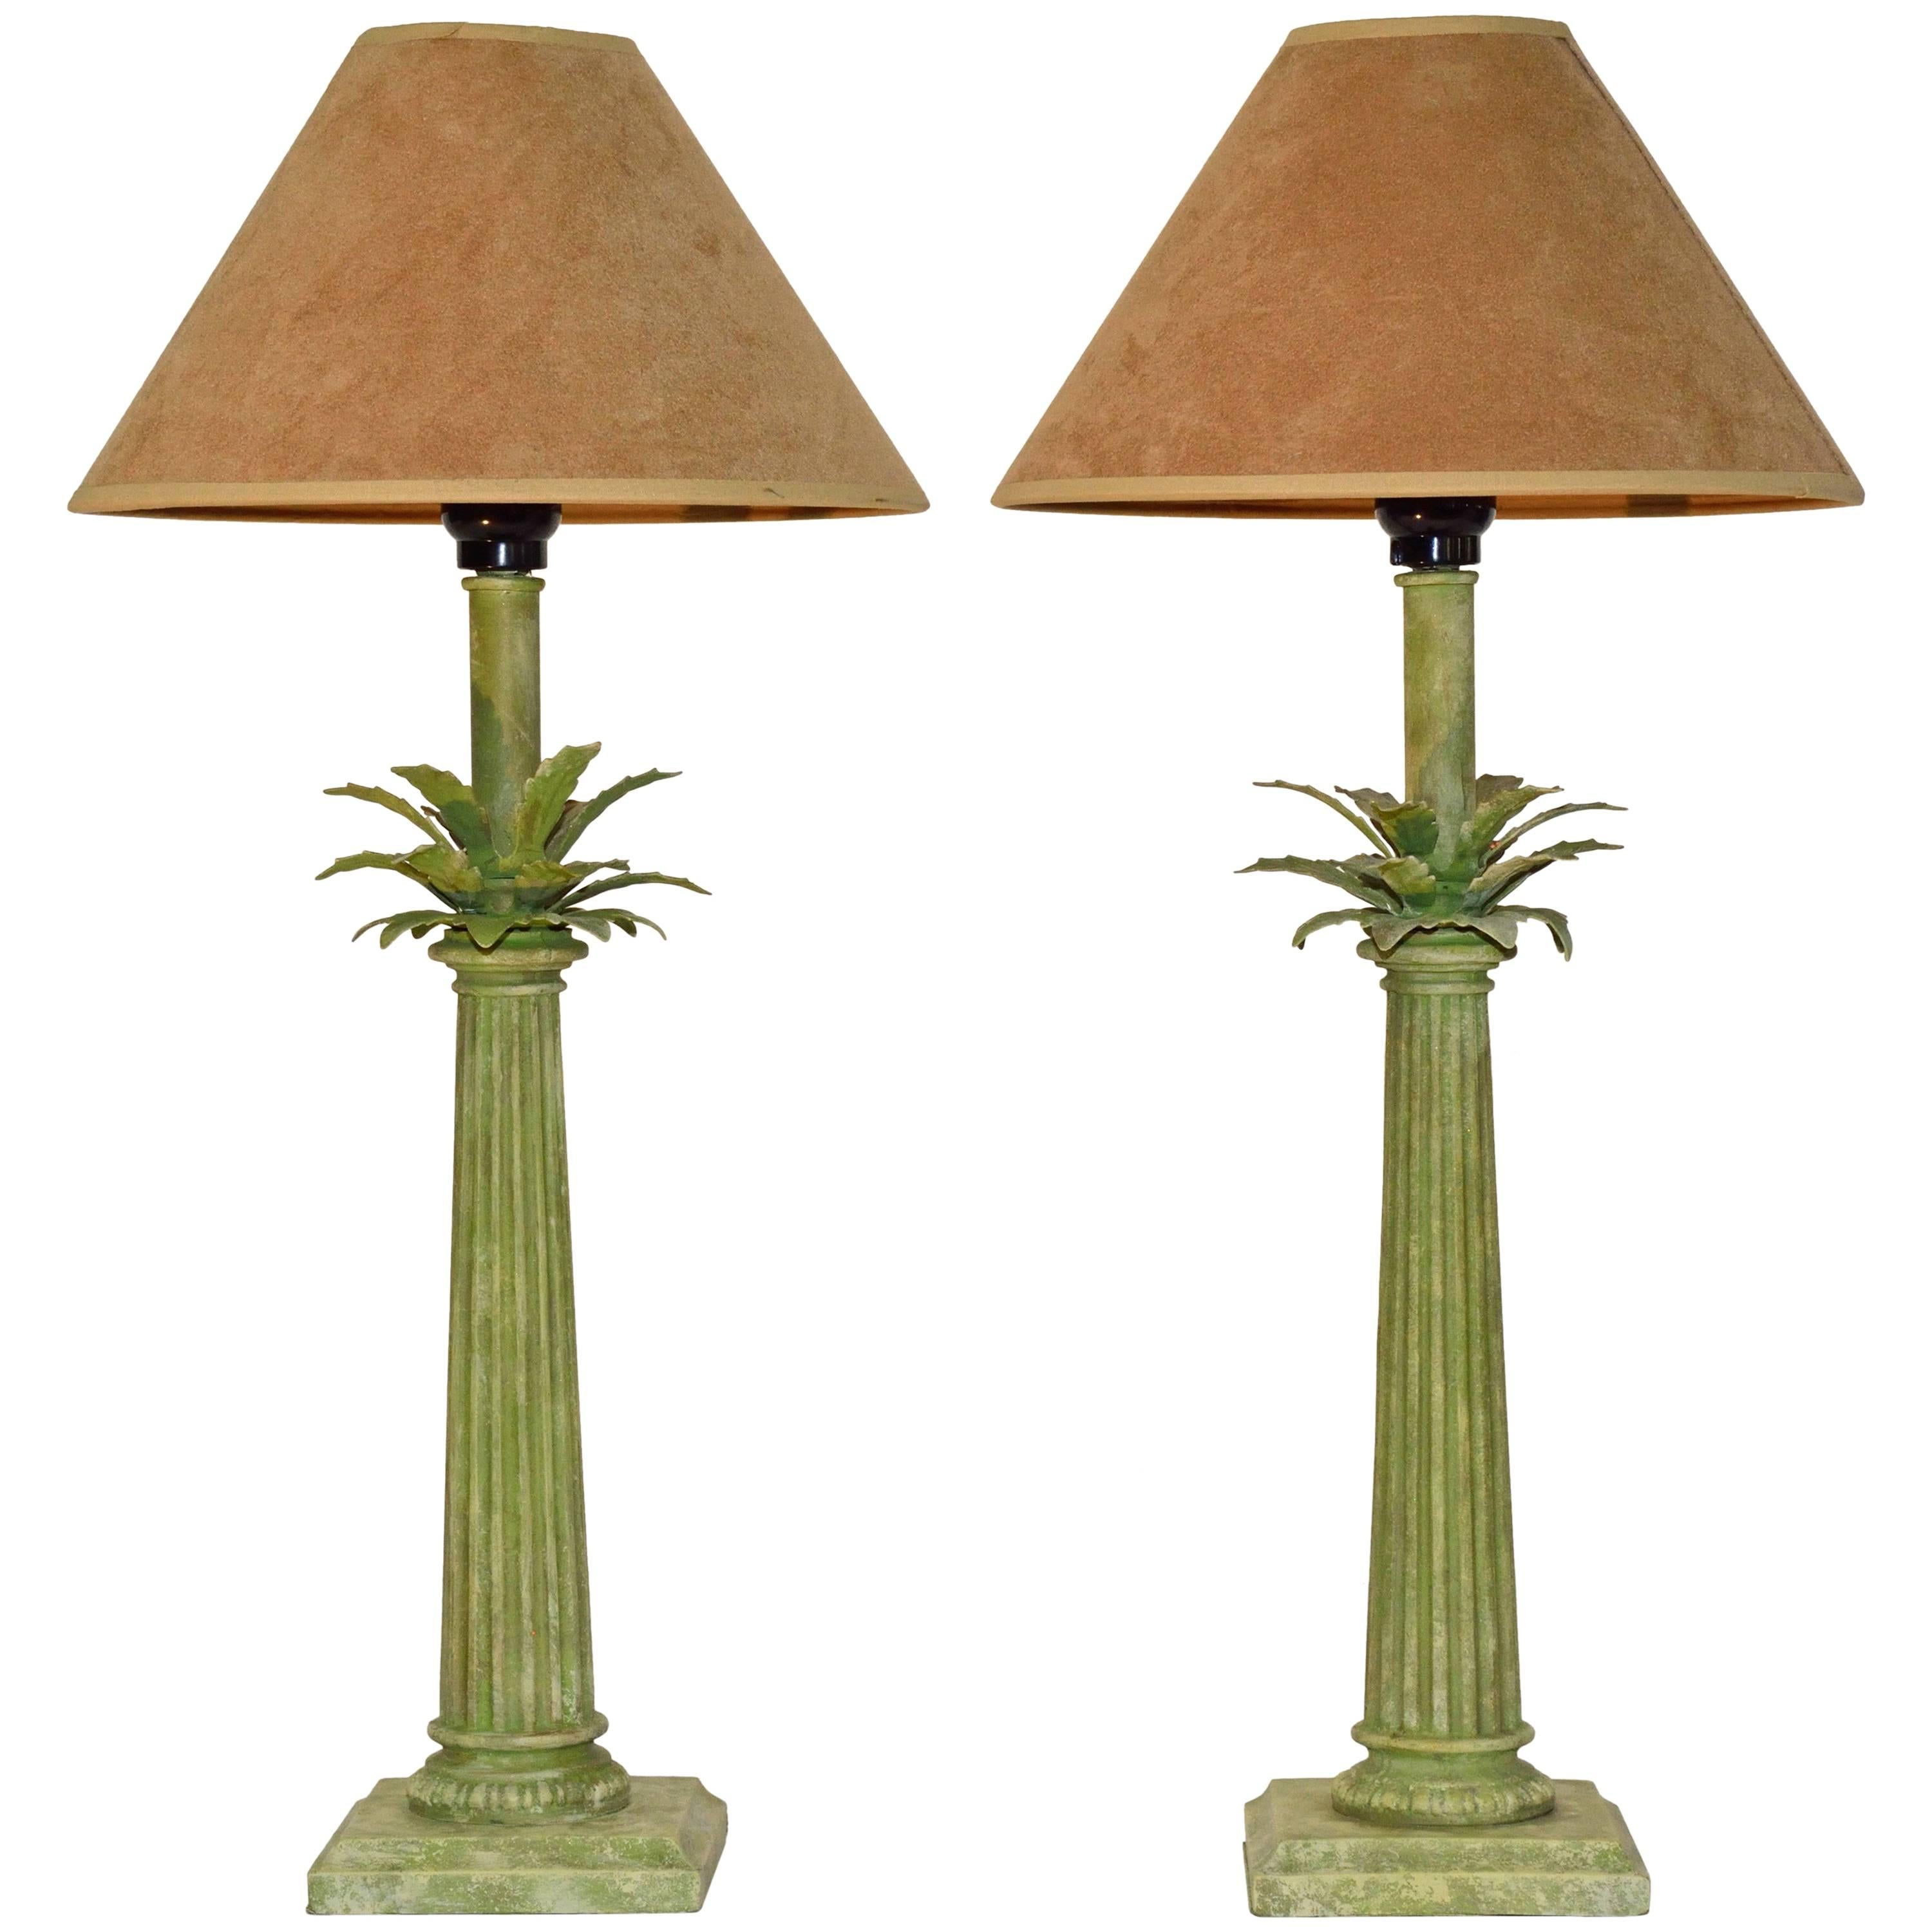 Pair of Green Column or Palm Leaf Lamps